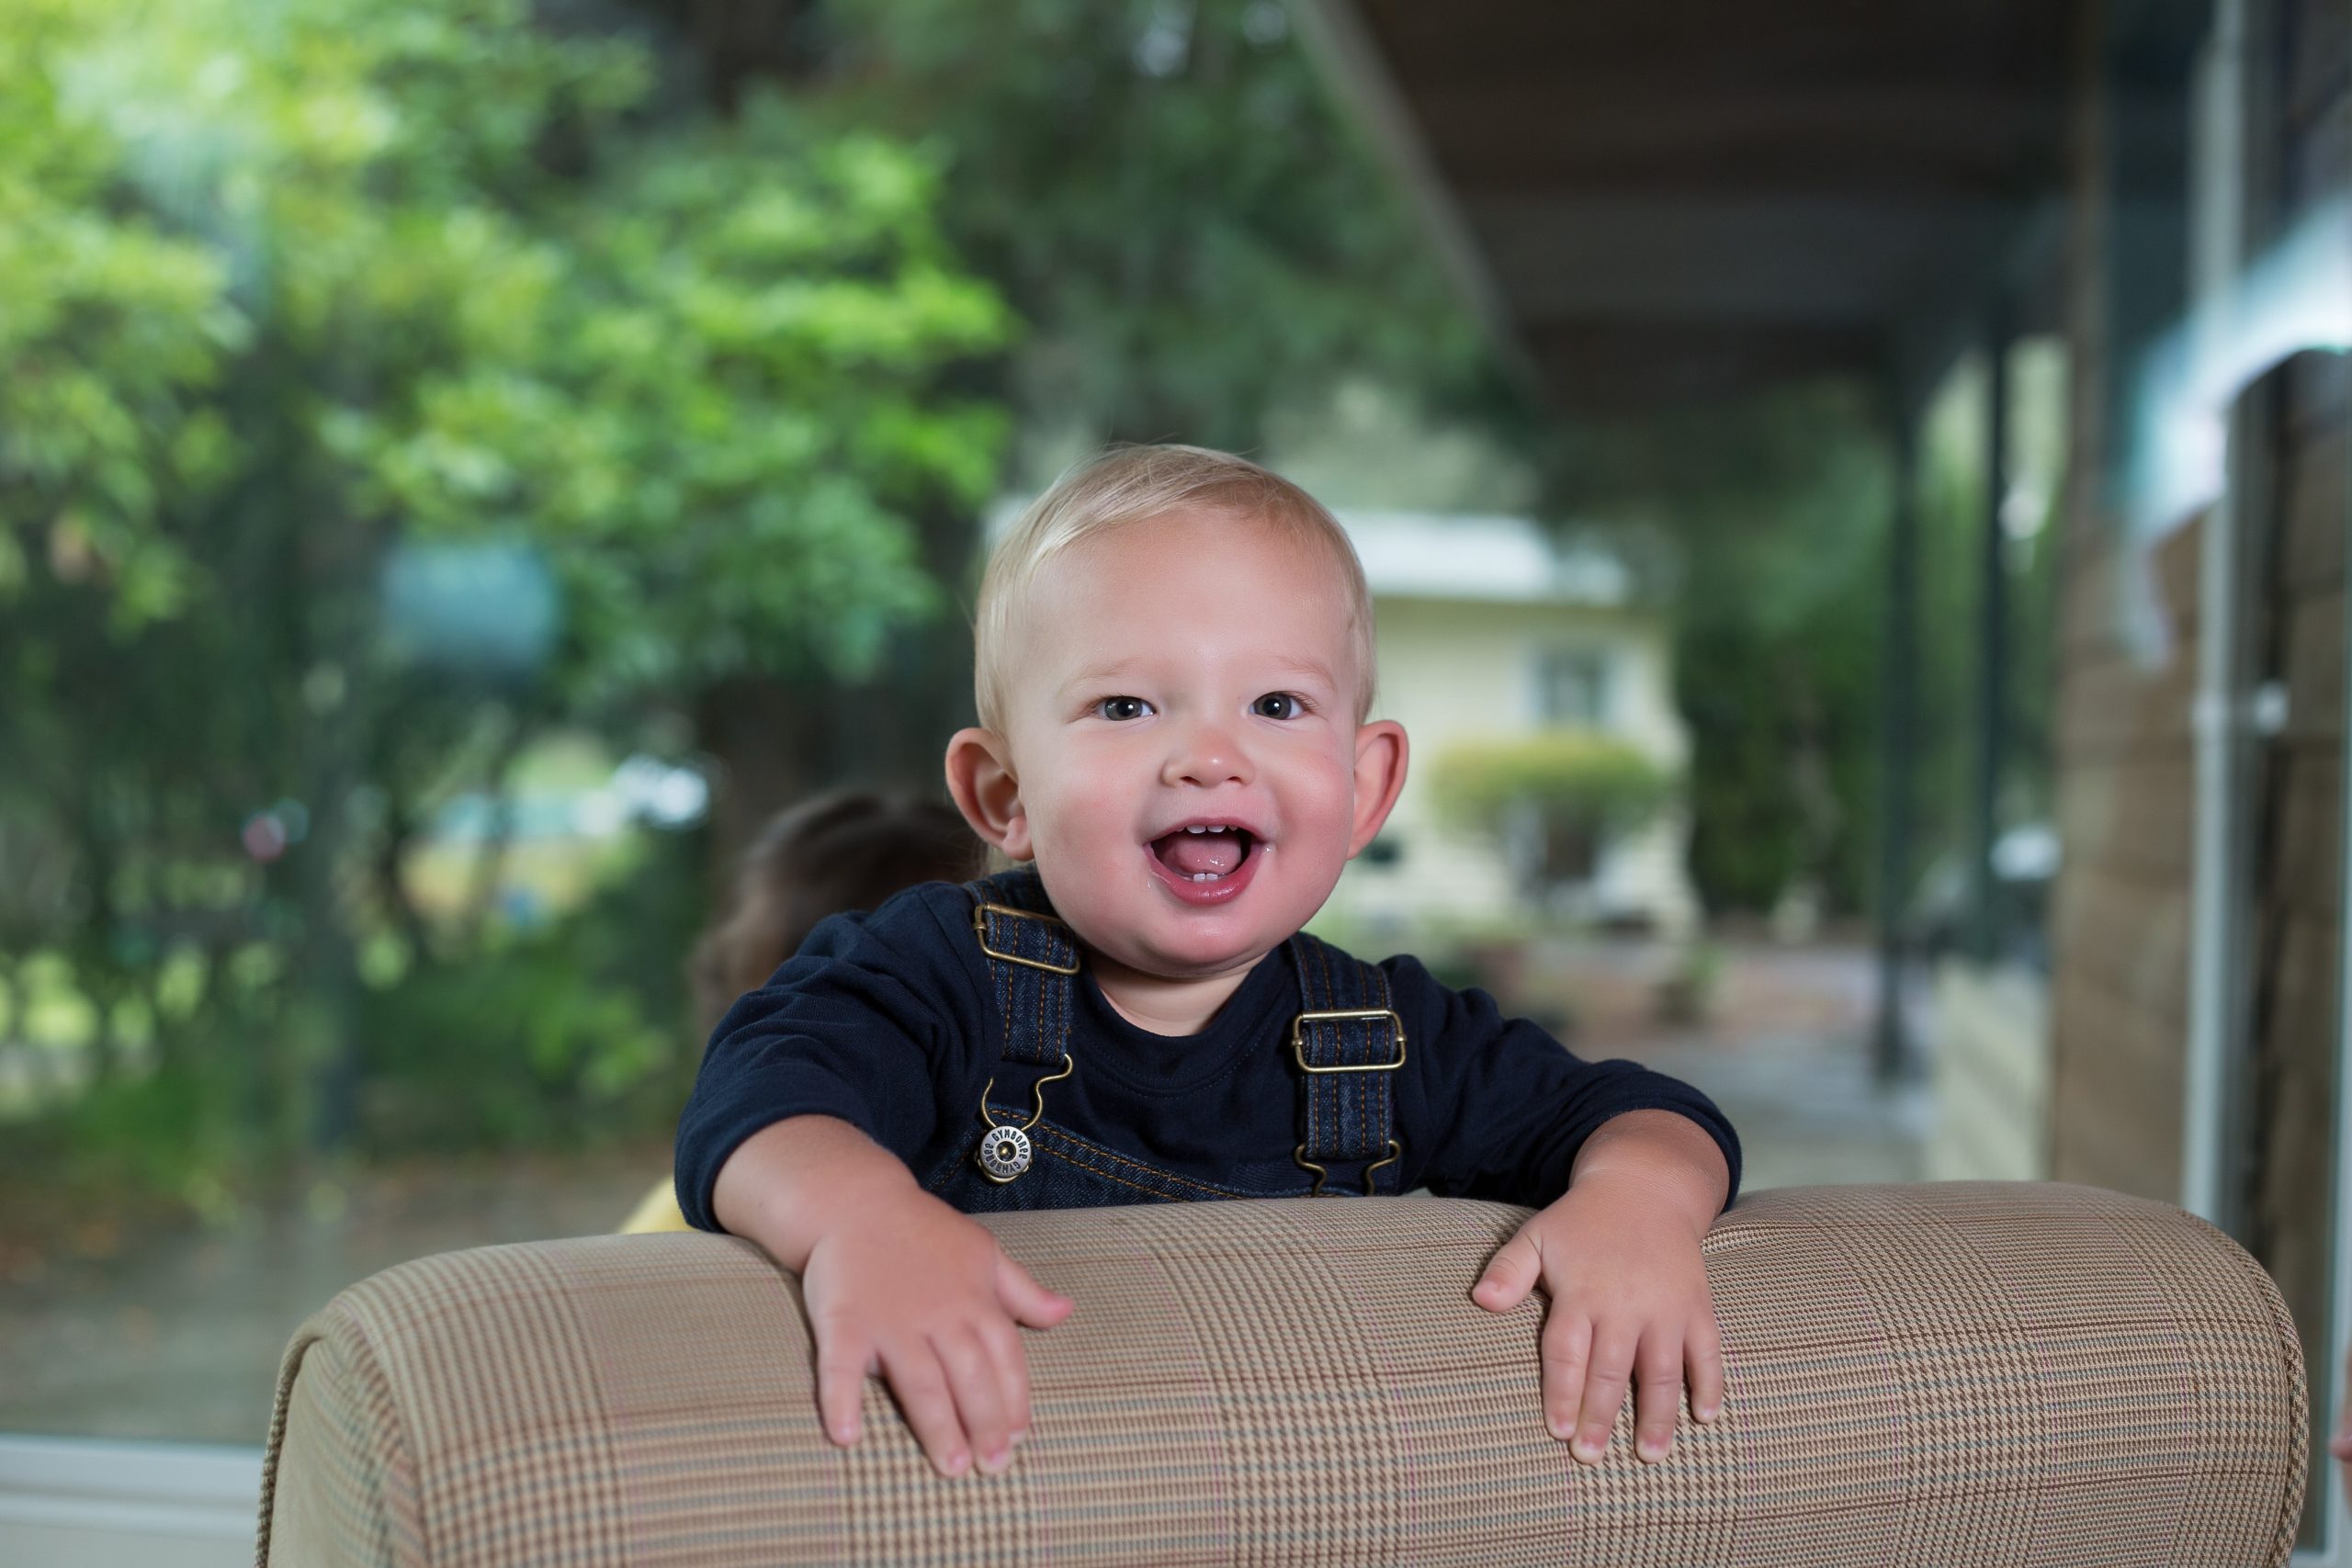 Blond toddler wearing overalls and smiling